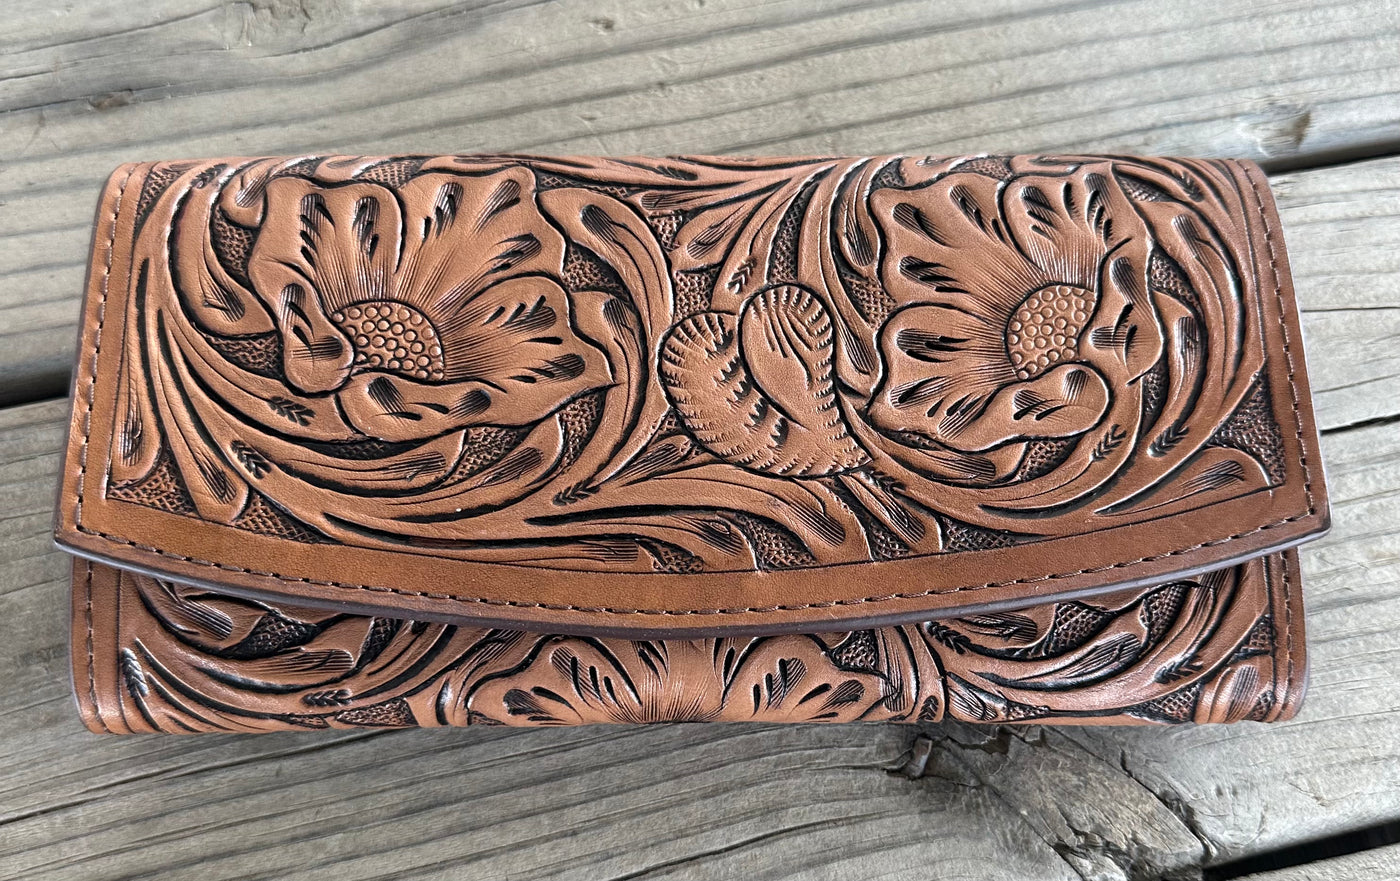 Iris Leather tooled Clutch